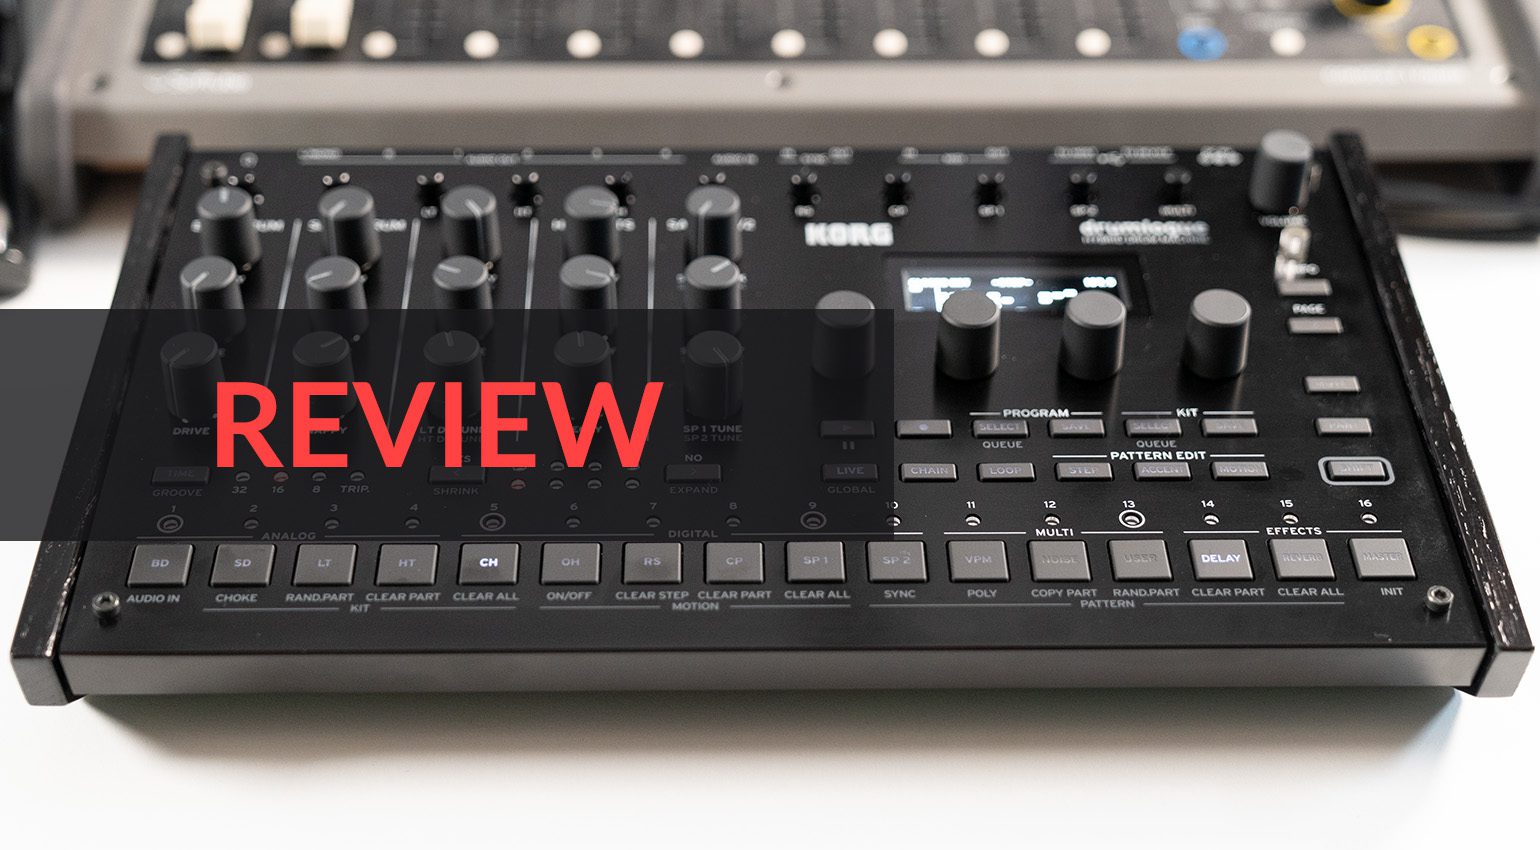 Review: Korg drumlogue – the drum machine of the future?